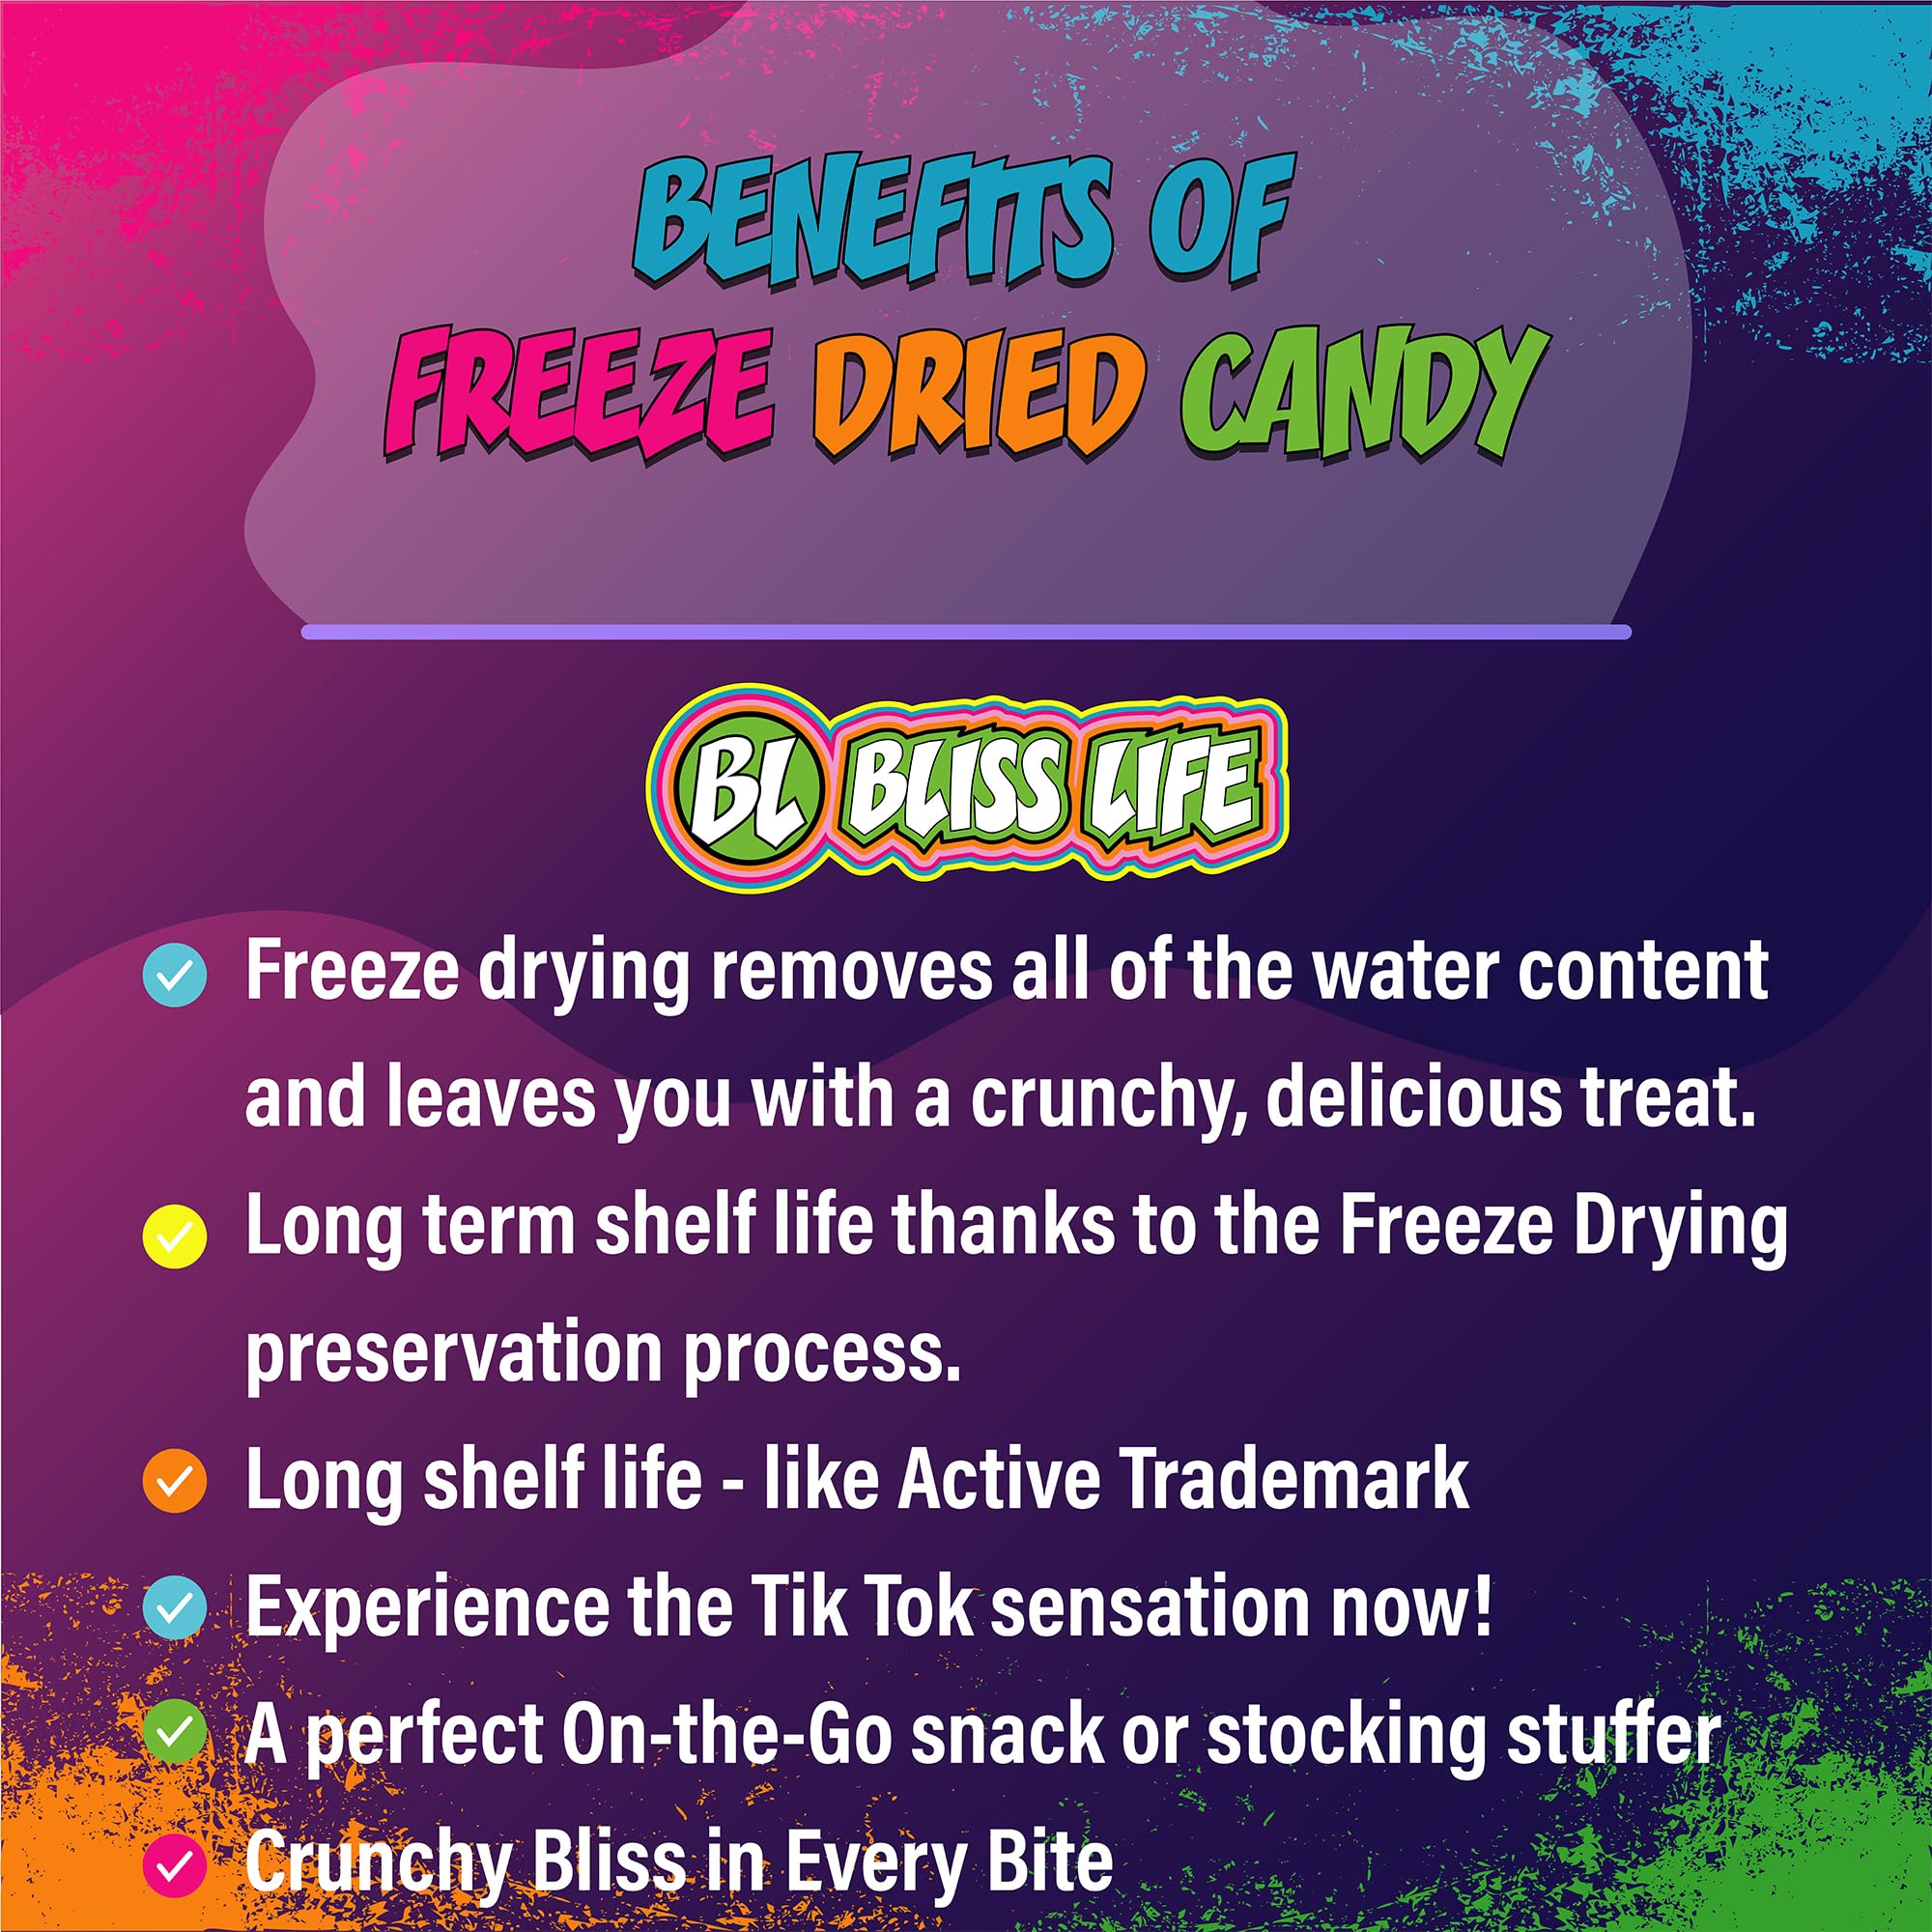 Bliss Life Jolly Puffers Freeze Dried Candy Variety Pack 2 oz, Freeze Dried Sour Candy, Unique Novelty, ASMR Candy - Great for the Tiktok Trend Most Sour Candy in the World Challenge